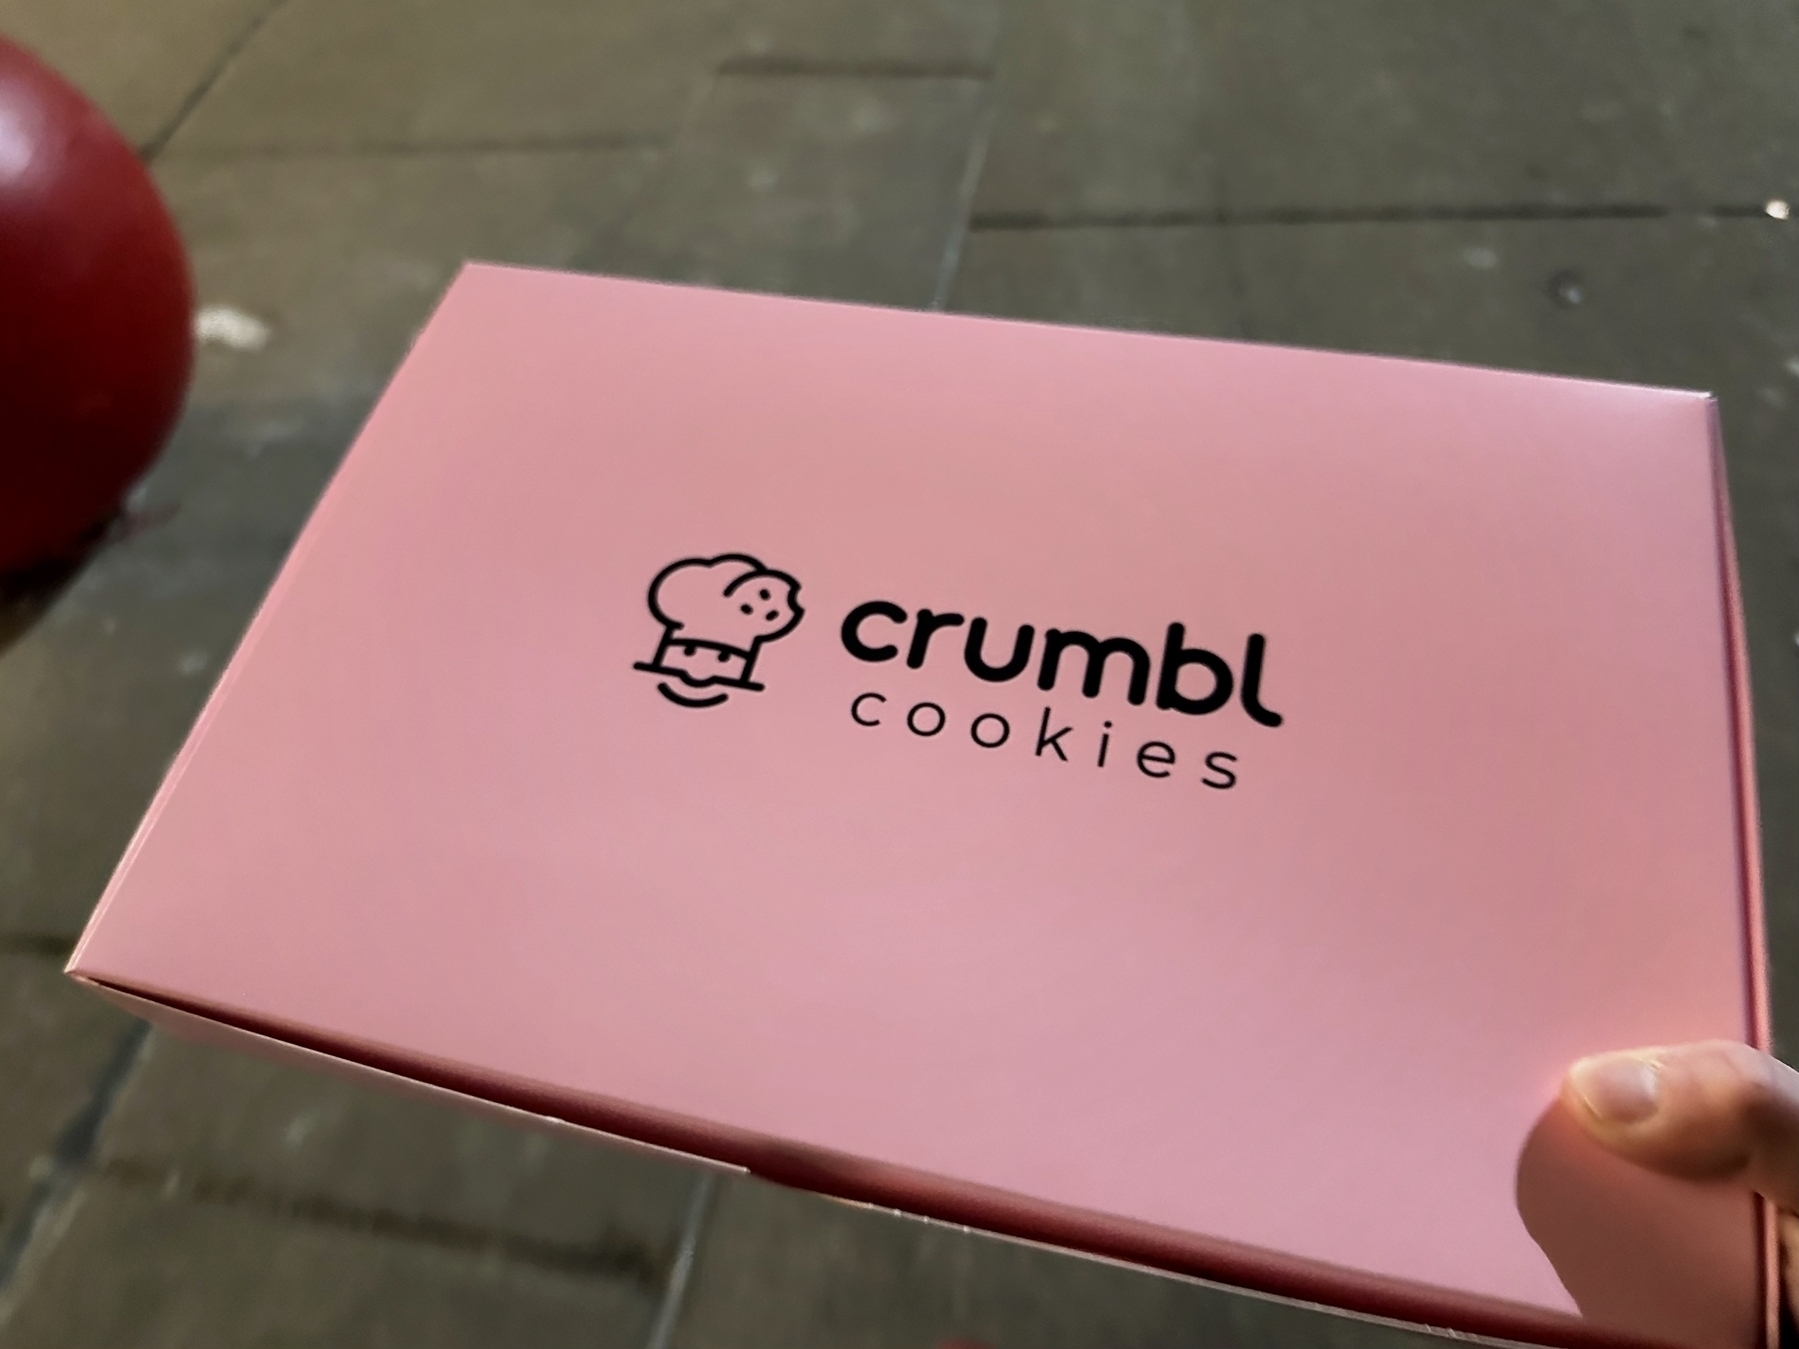 A hand holds a pink box with the logo “crumbl cookies” featuring a stylized cookie illustration, against a blurred street background